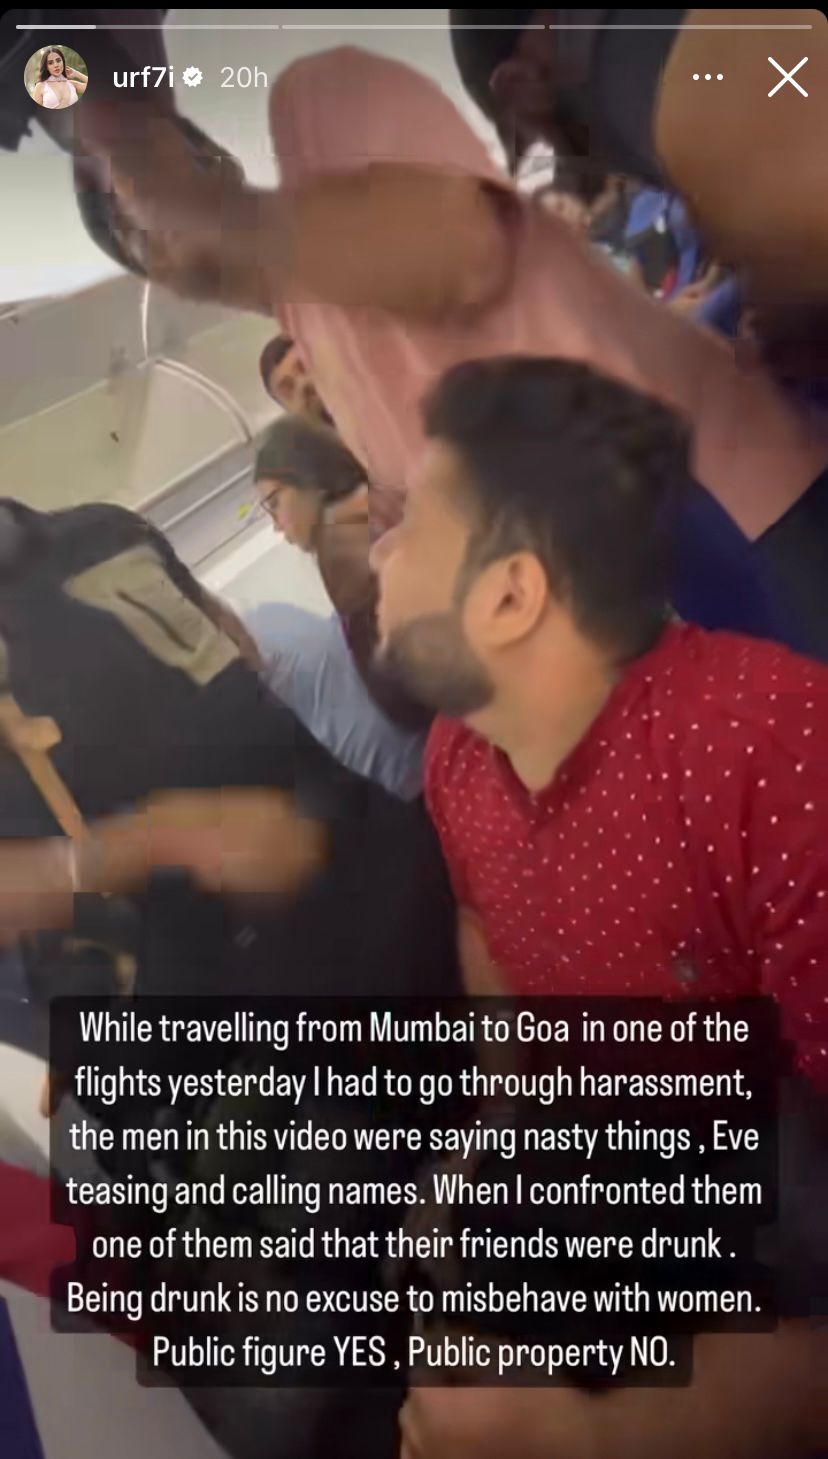 Urfi Javed posts video of 4 'drunk' men who harassed her on flight to Goa, says ‘I am public figure, not public property’